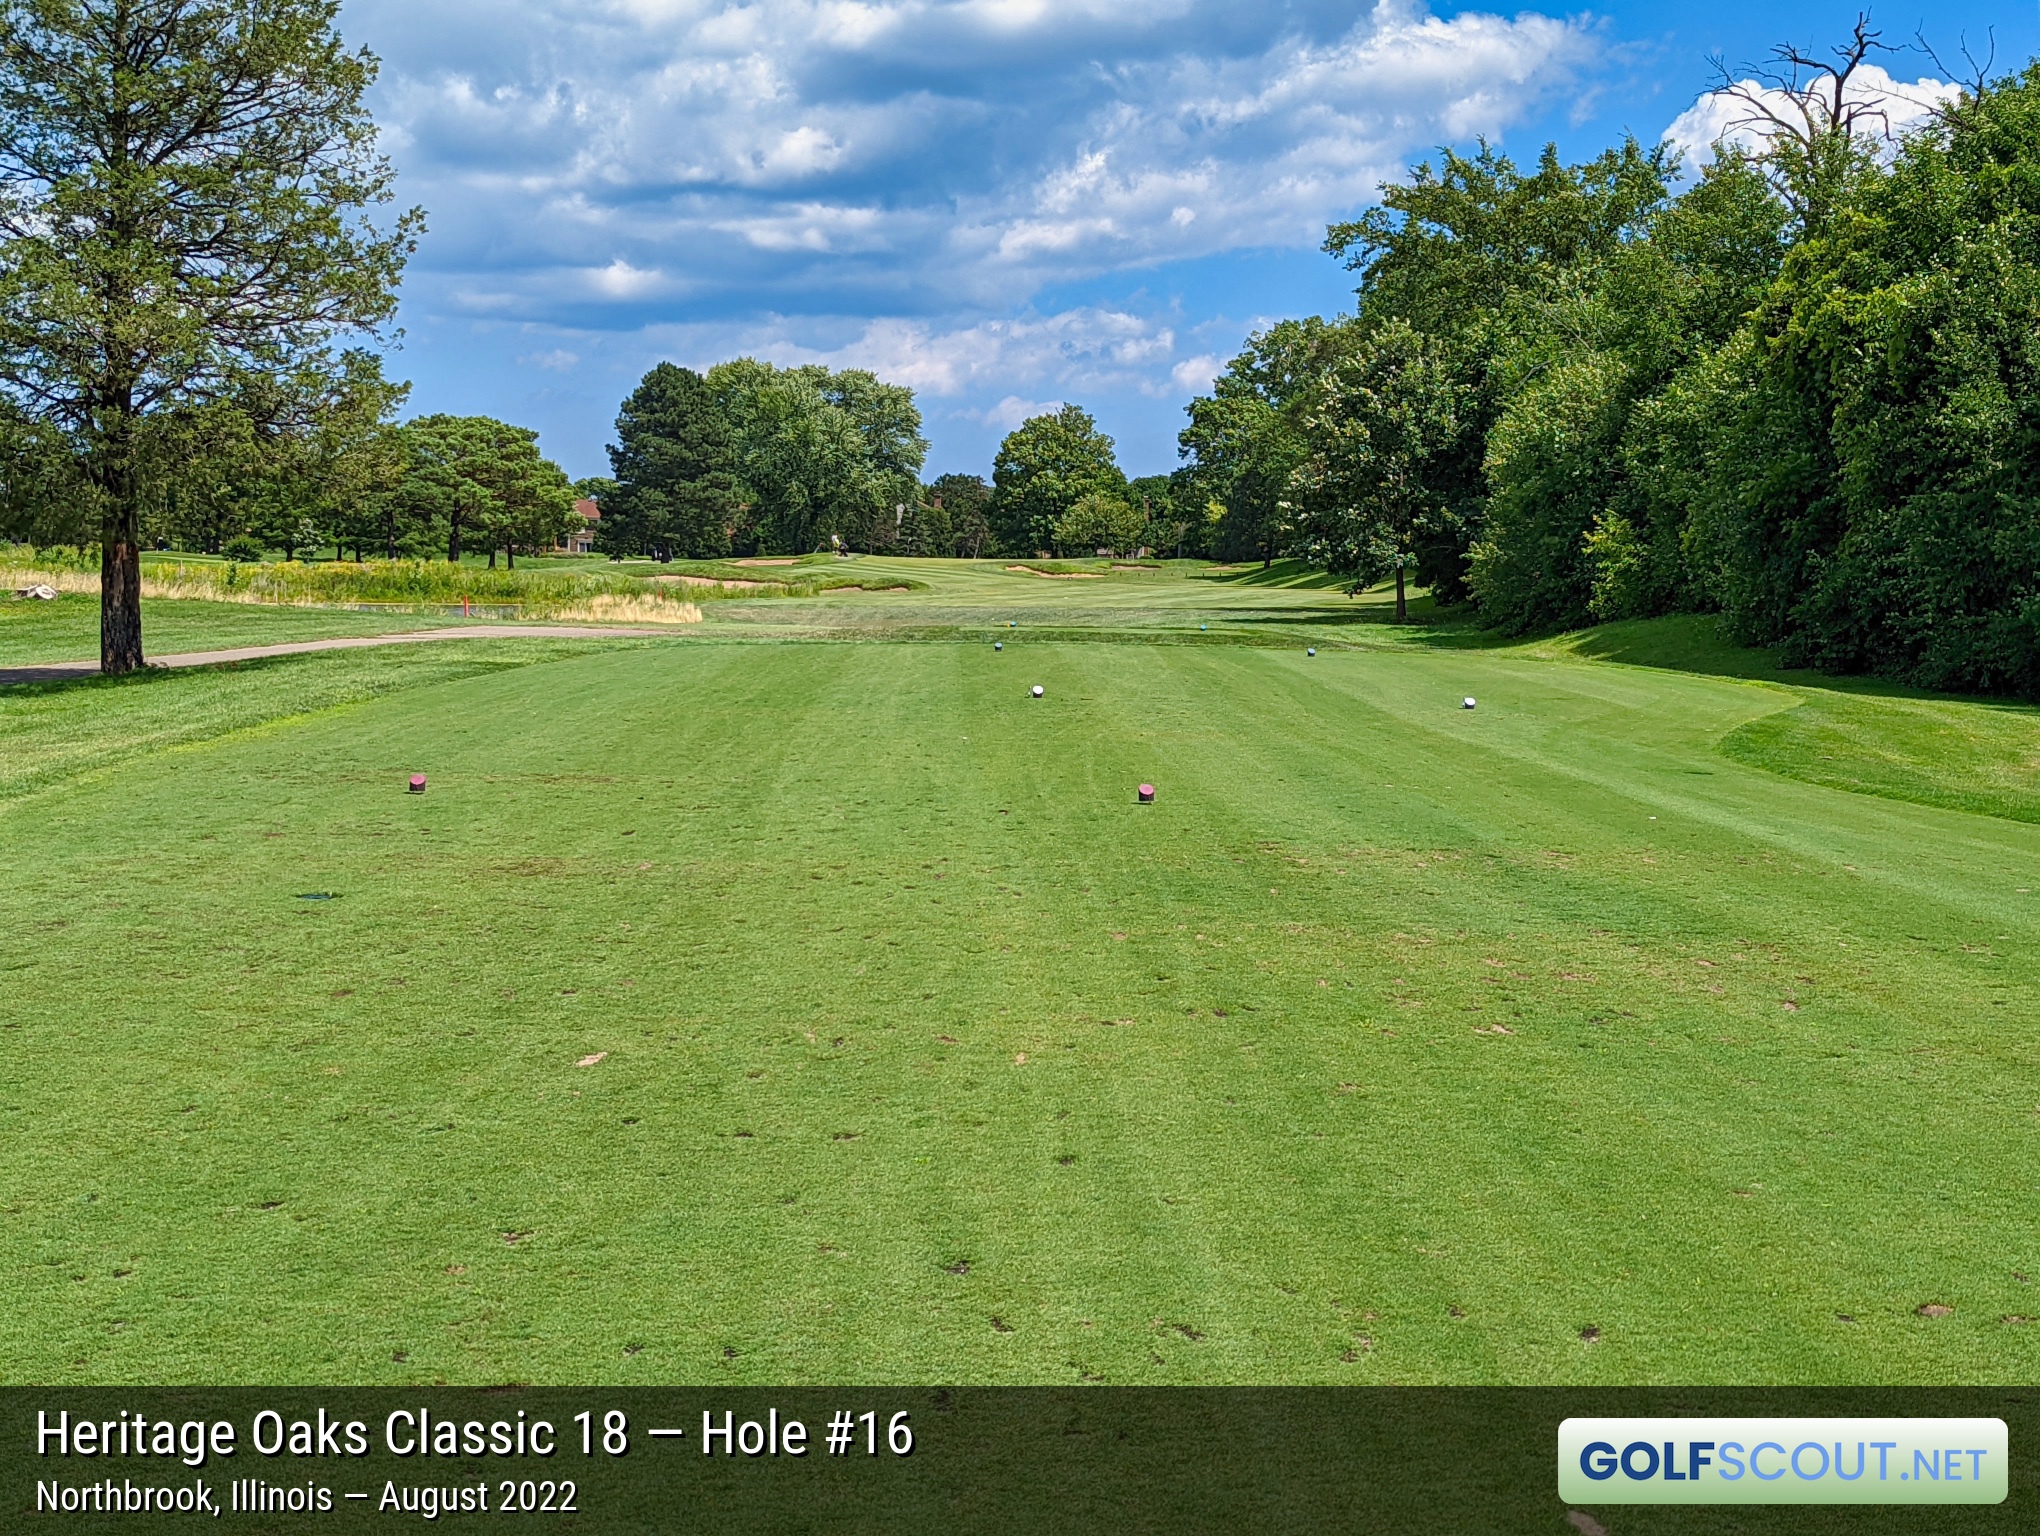 Photo of hole #16 at Heritage Oaks Golf Club - Classic 18 in Northbrook, Illinois. 